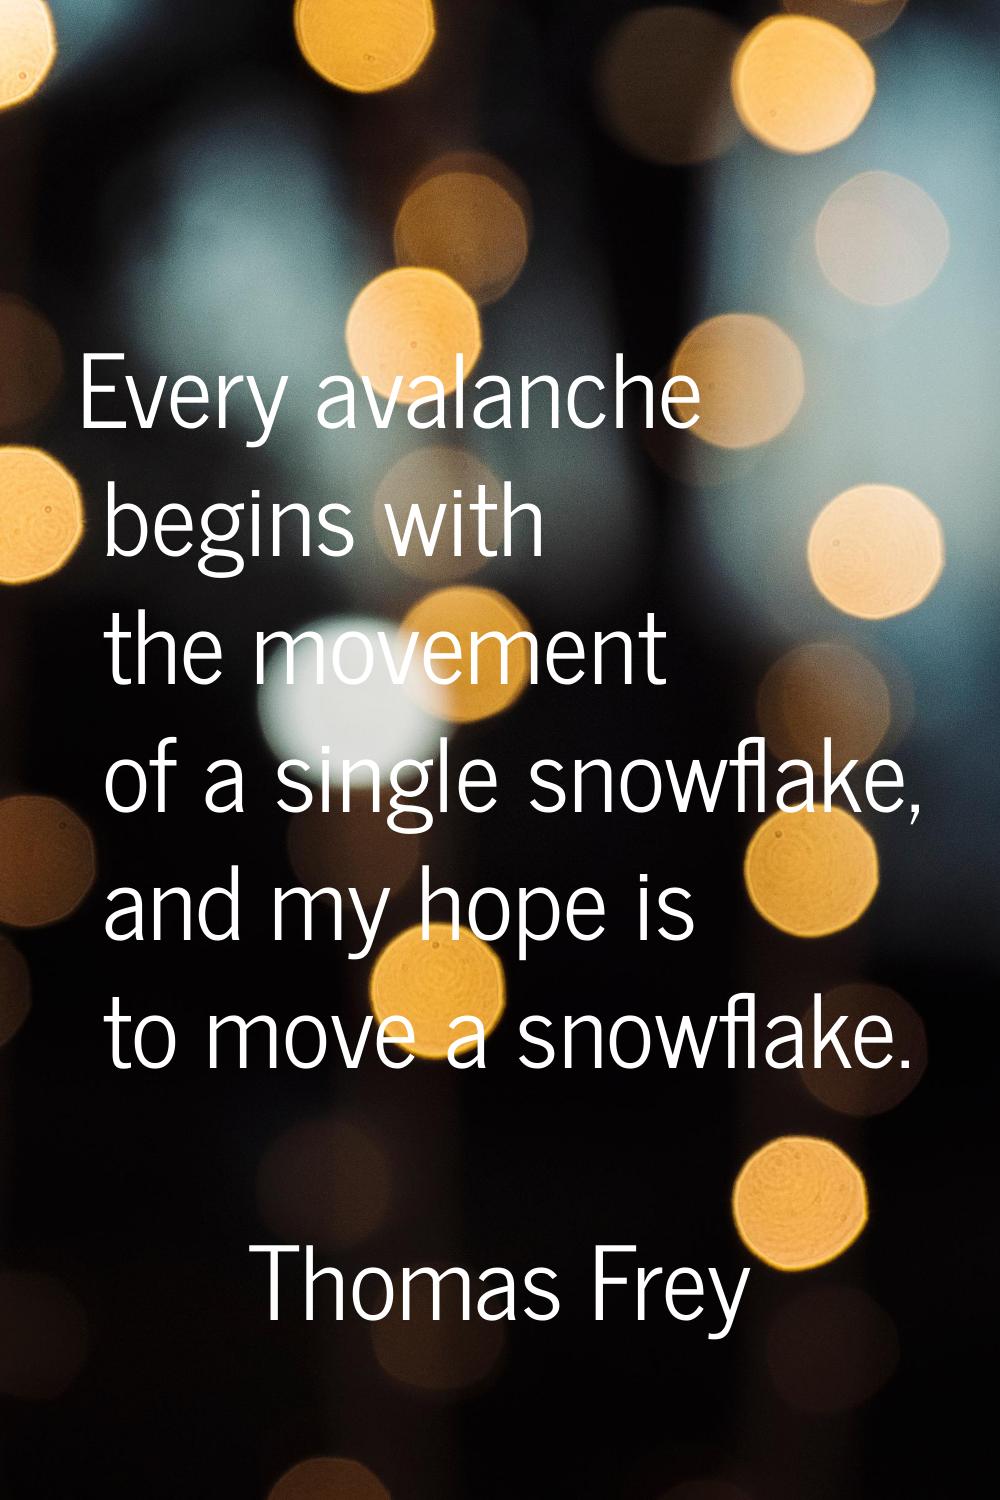 Every avalanche begins with the movement of a single snowflake, and my hope is to move a snowflake.